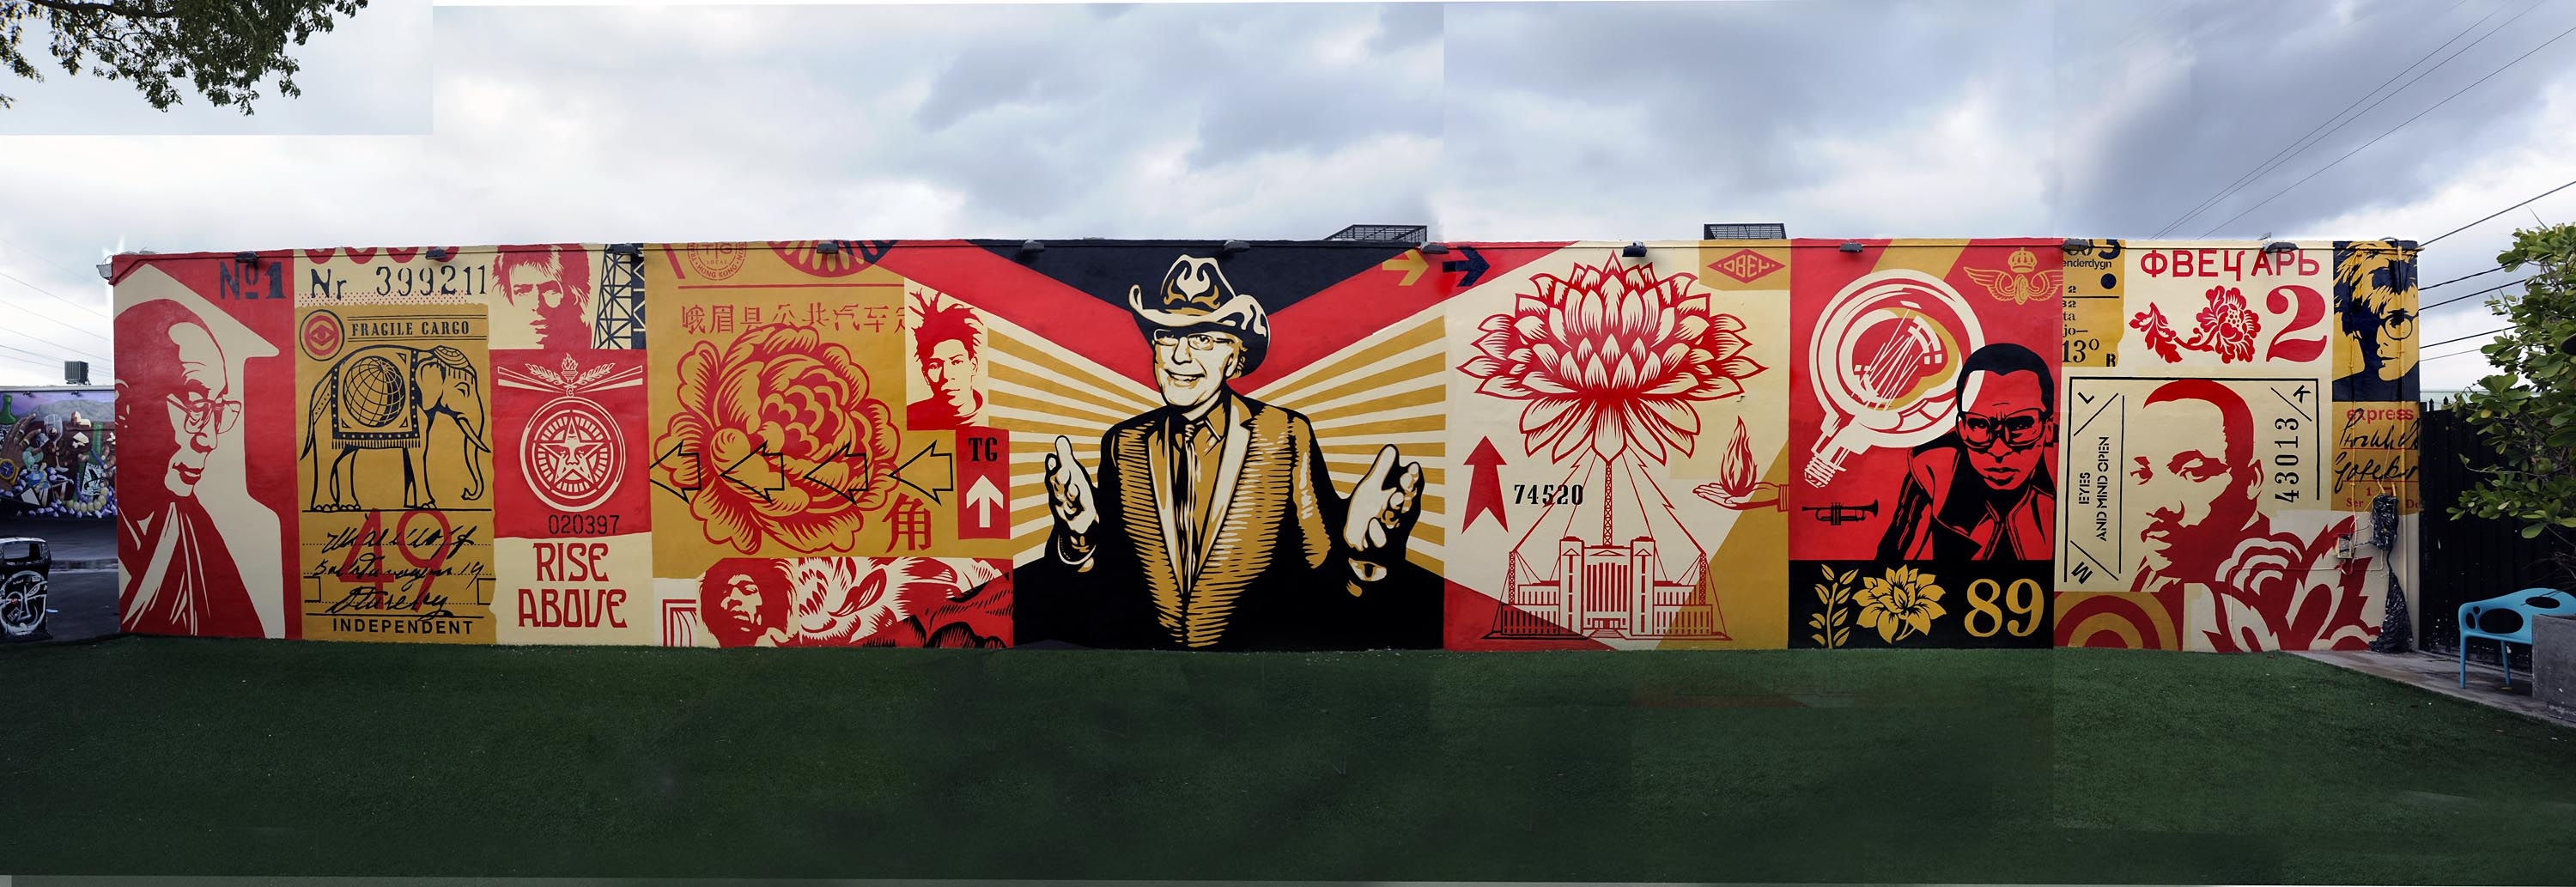 Shepard Fairey's mural at Wynwood Walls in Miami.  Courtesy of Martha Cooper